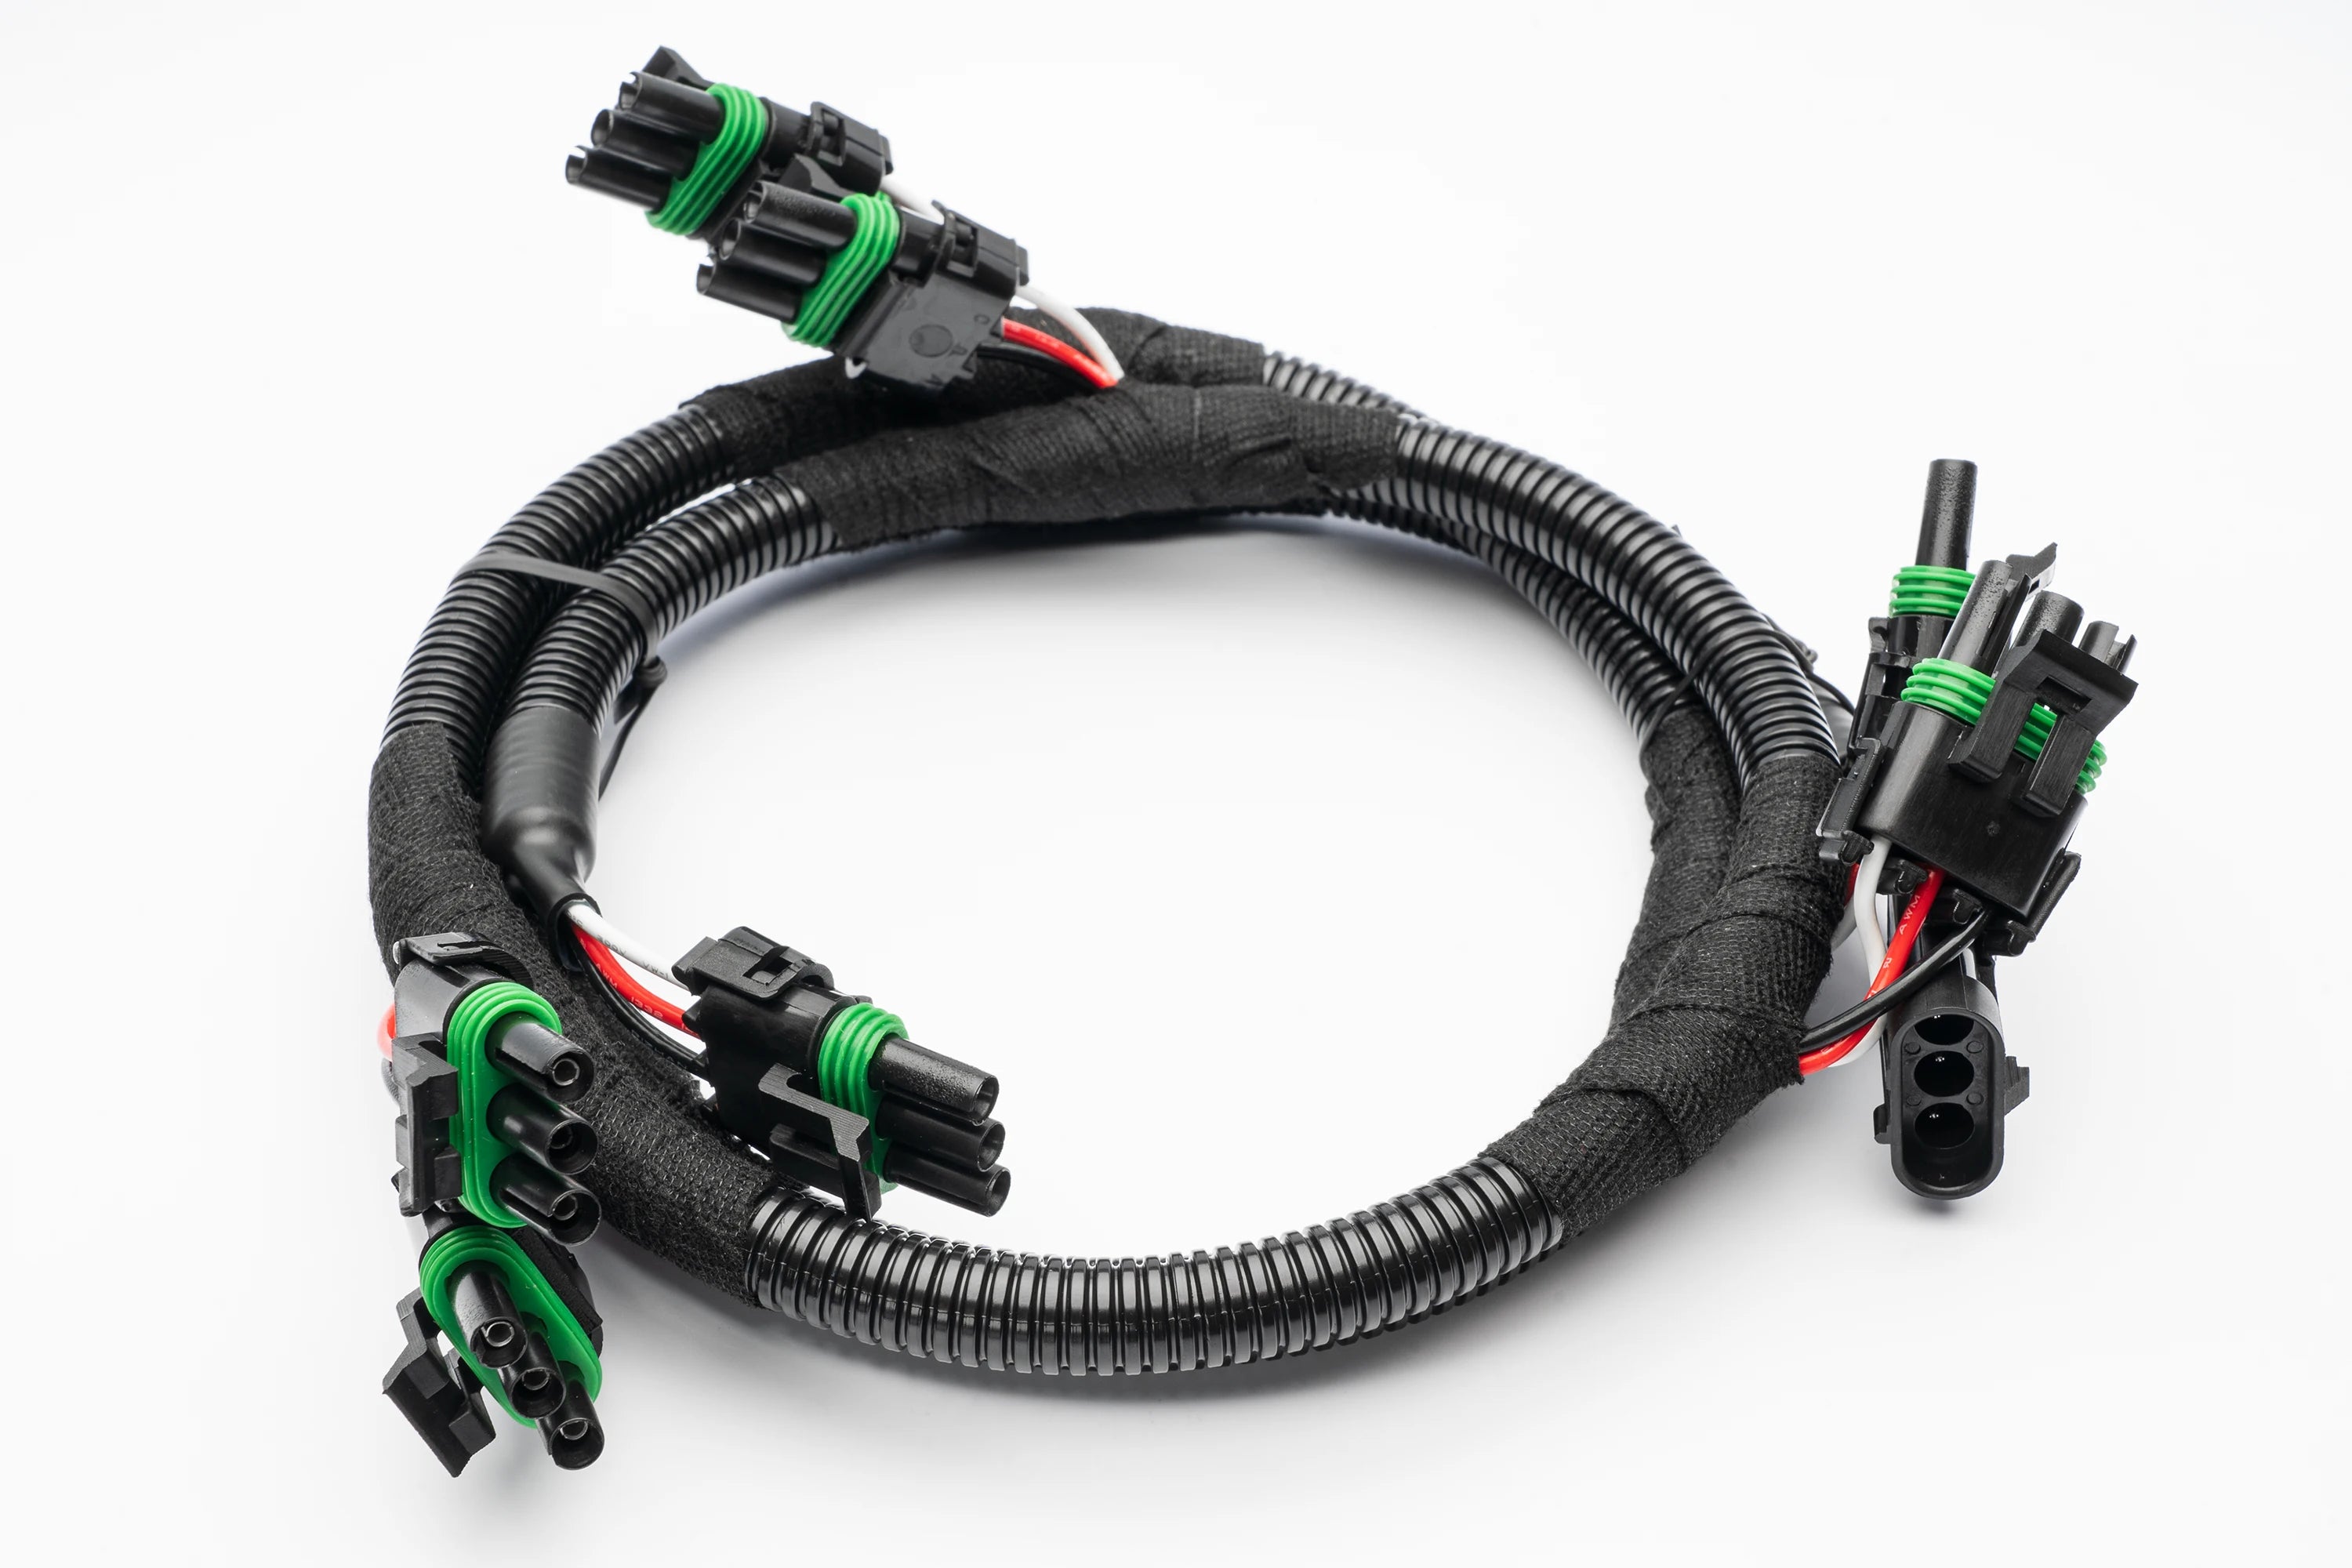 8X 3 Pole Chain Harness Splitter add on - SPV Harness System (Works with MANY vehicles, See Details)